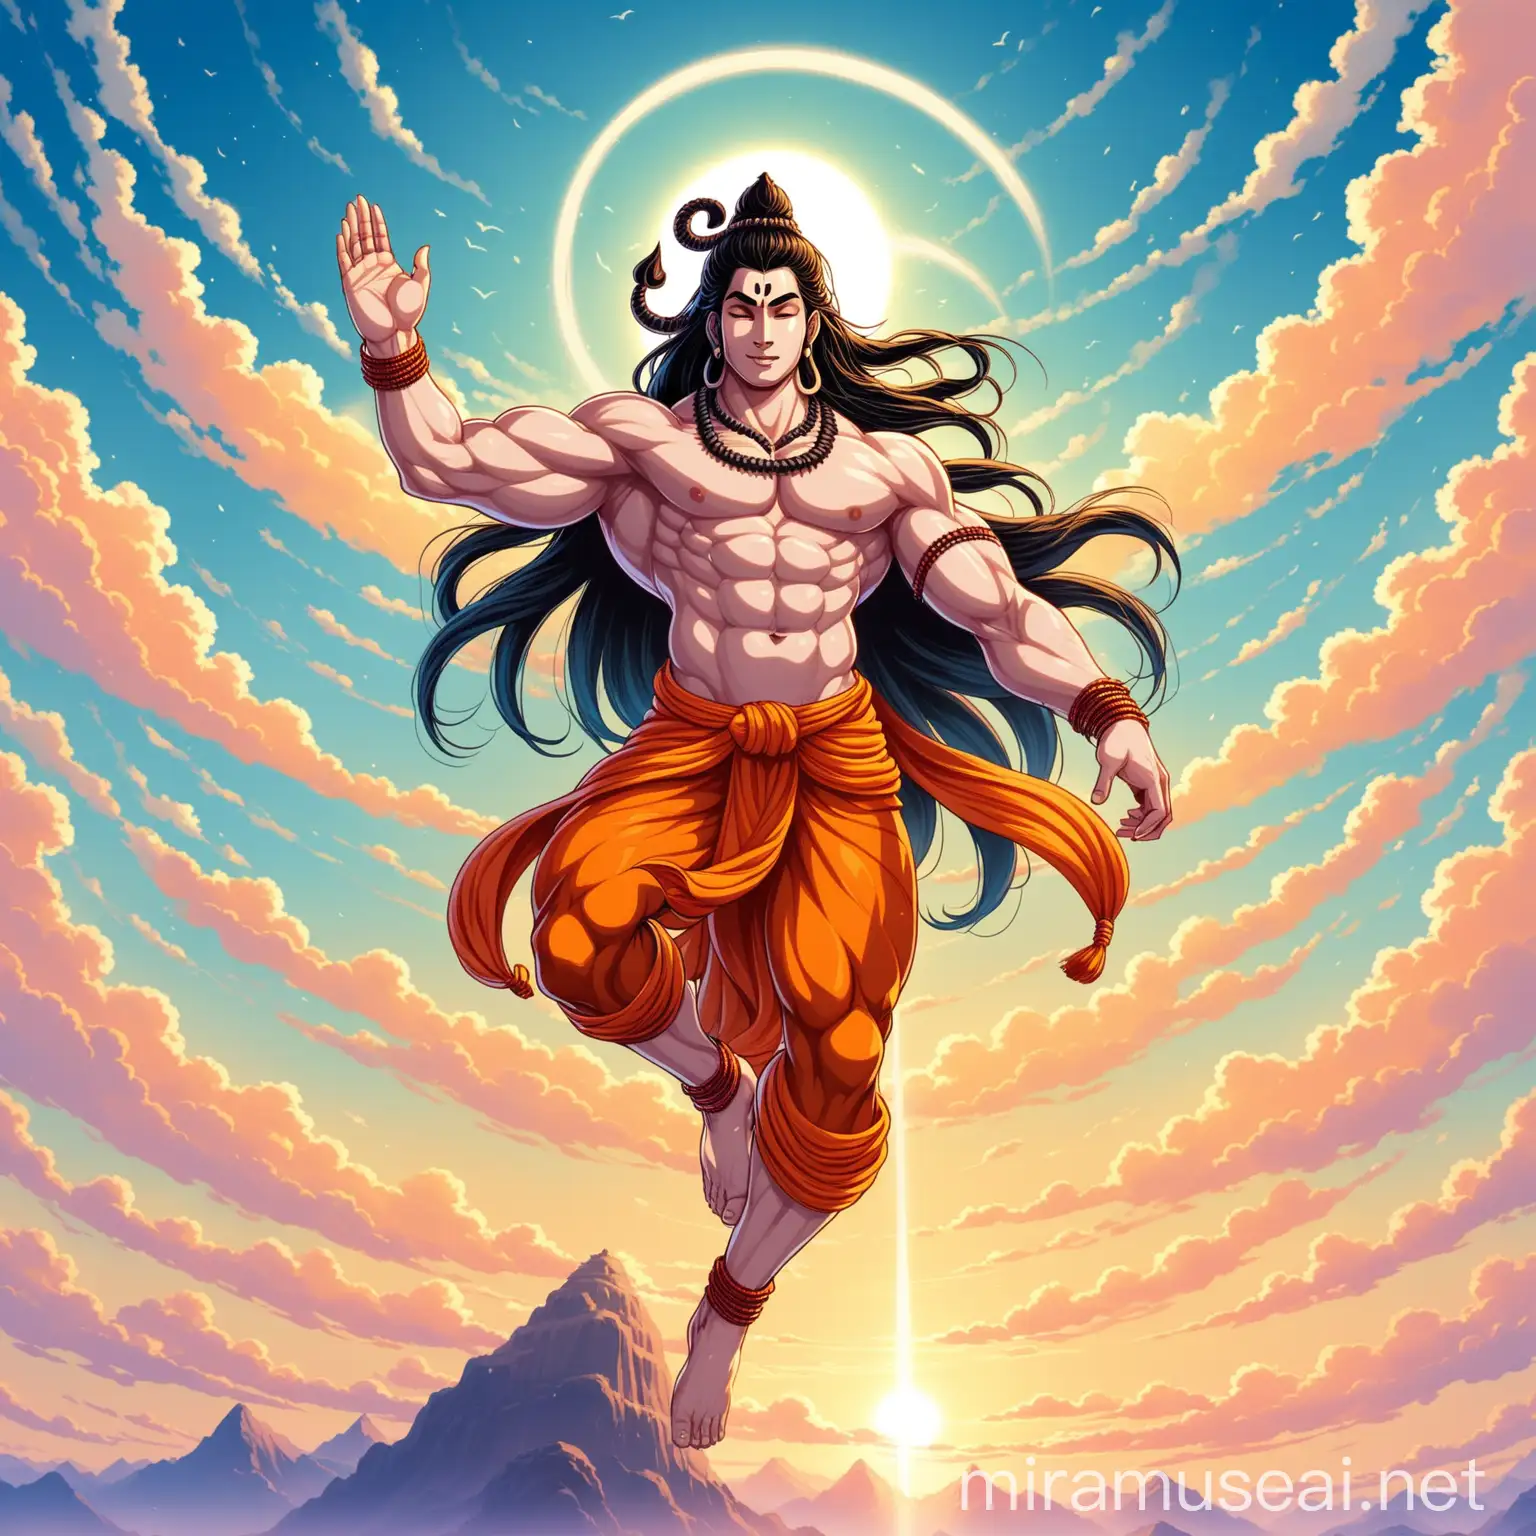 Divine Lord Shiva Soaring with Powerful Muscular Form